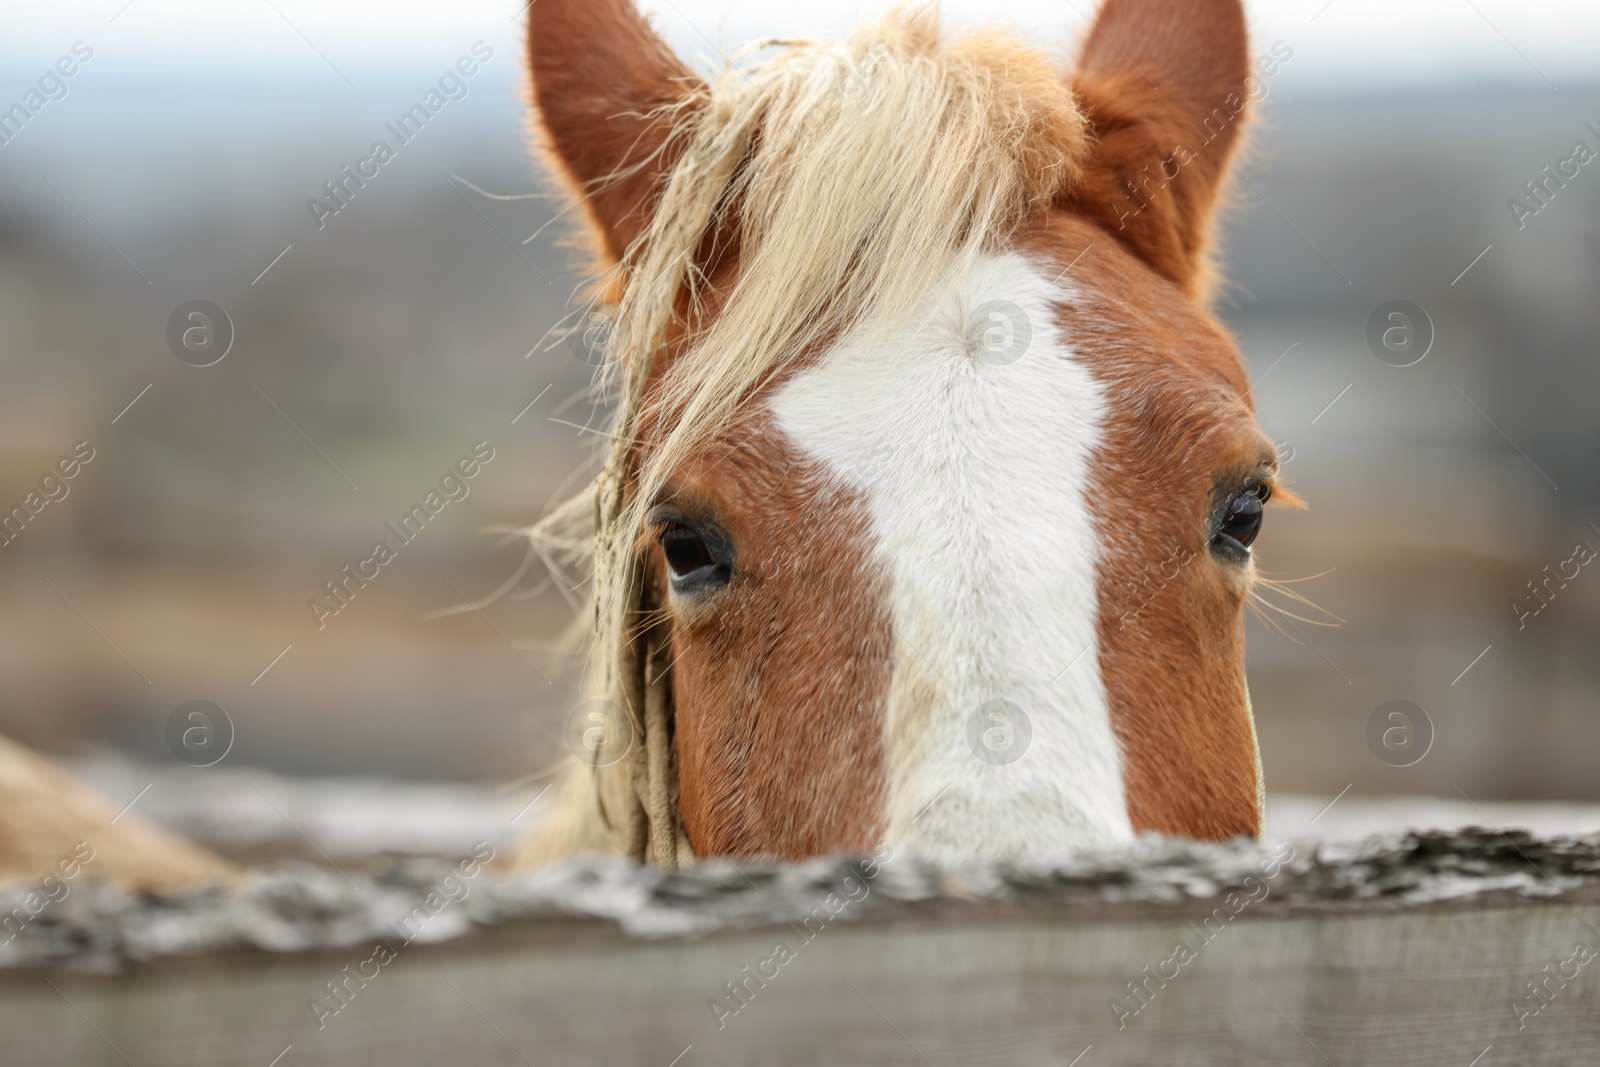 Photo of Adorable chestnut horse in outdoor stable, closeup. Lovely domesticated pet